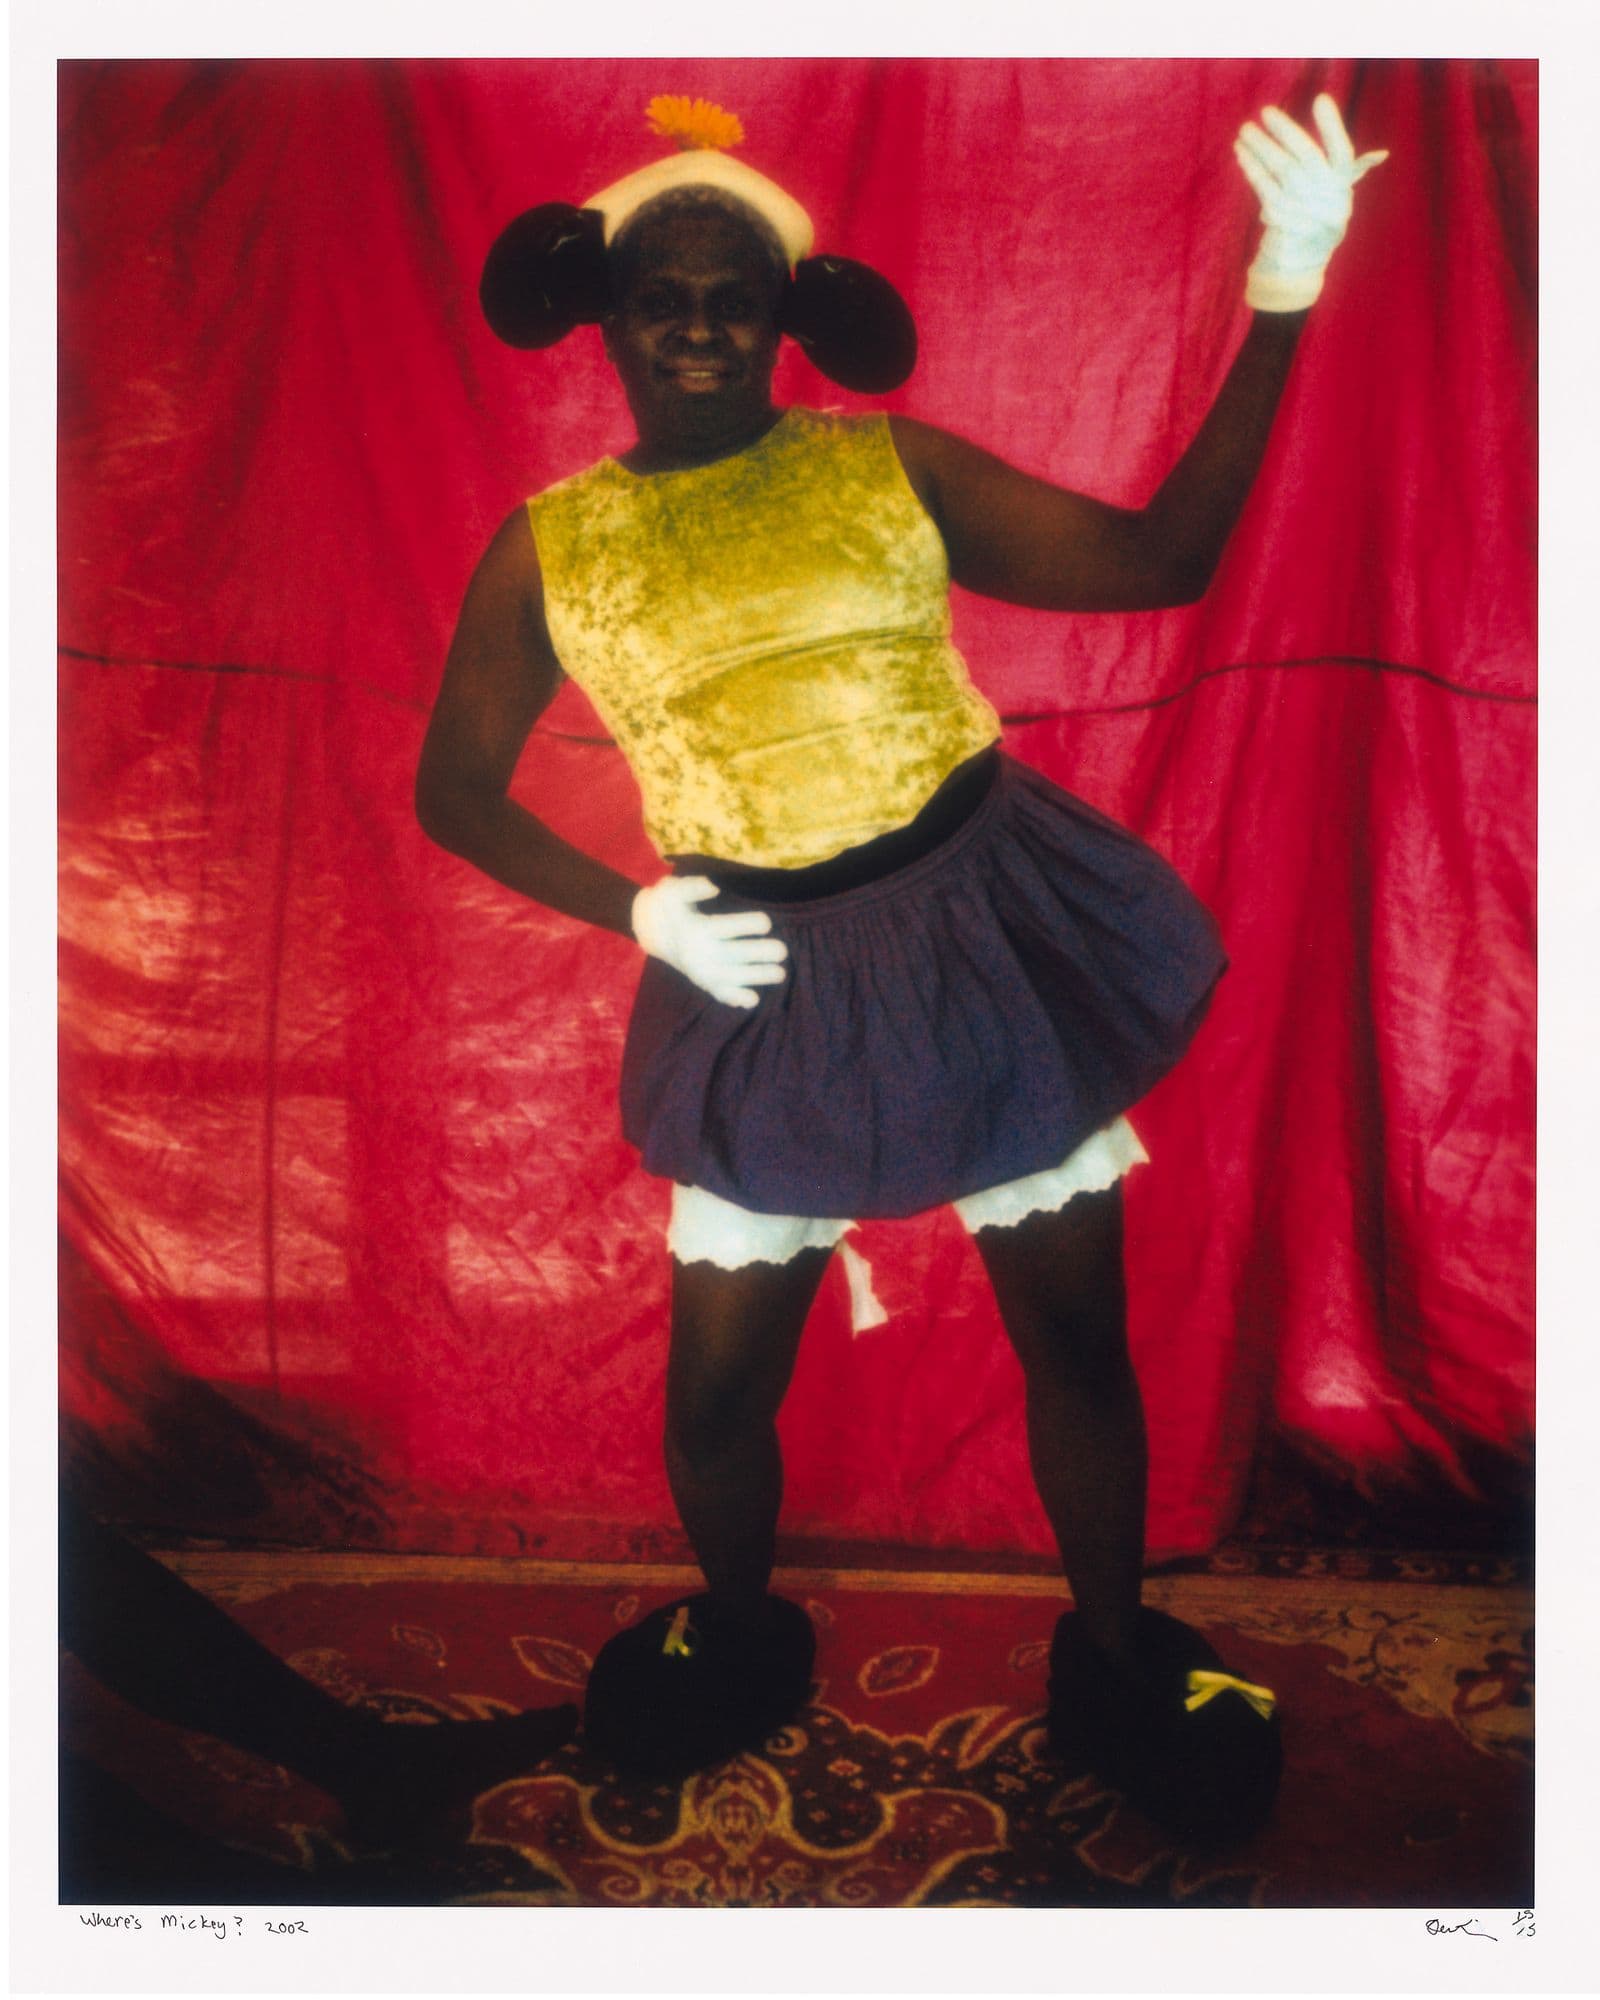 Photograph of First Nations person dressed as Mickey Mouse.